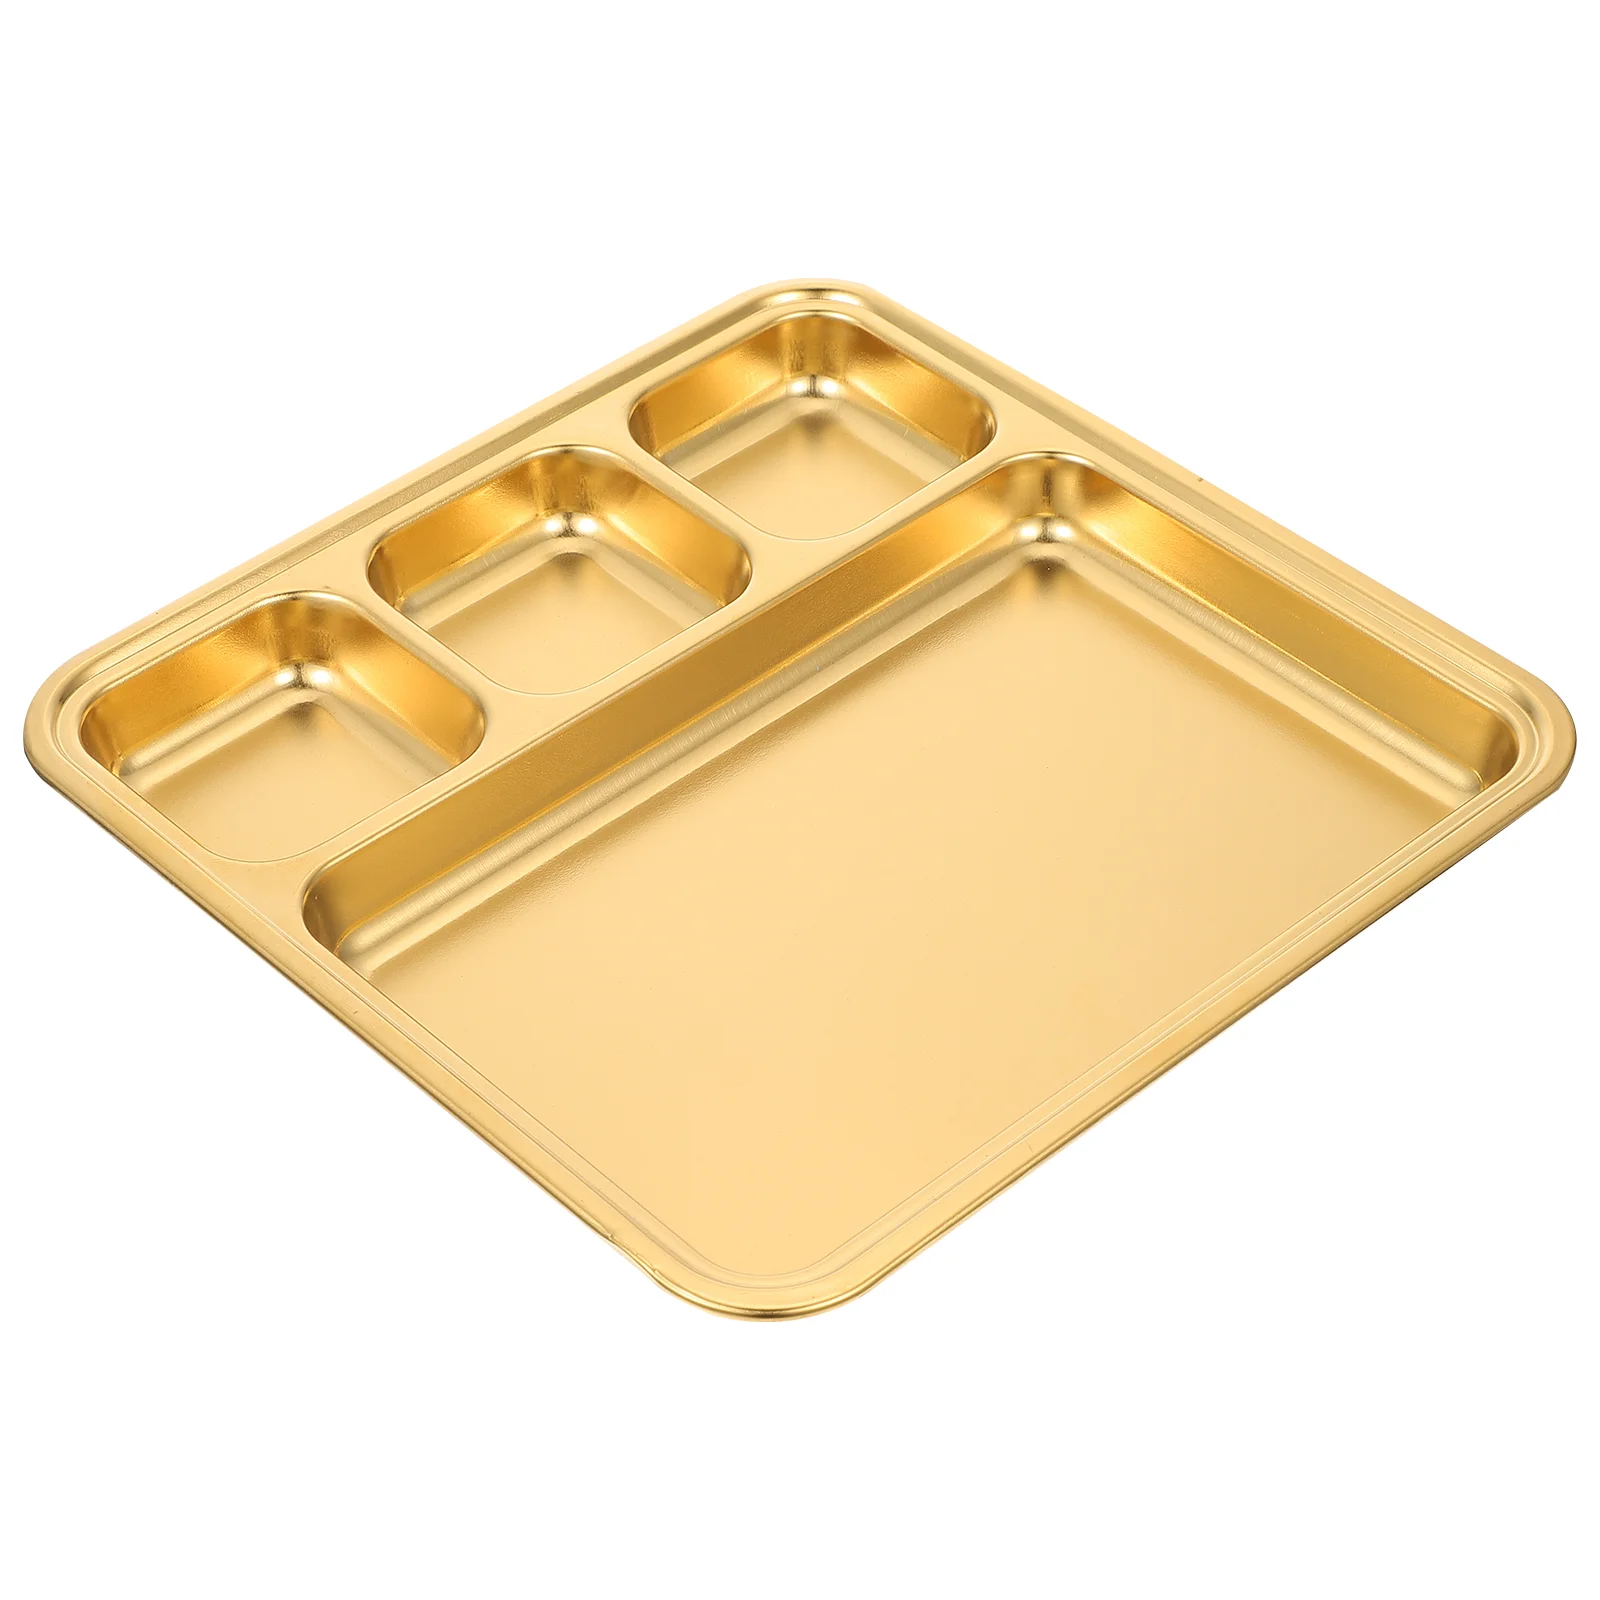 

Plate Plates Divided Dinner Stainless Steel Food Tray Compartment 4 Indian Trays Lunch Serving Portions Adults Thali Dishes